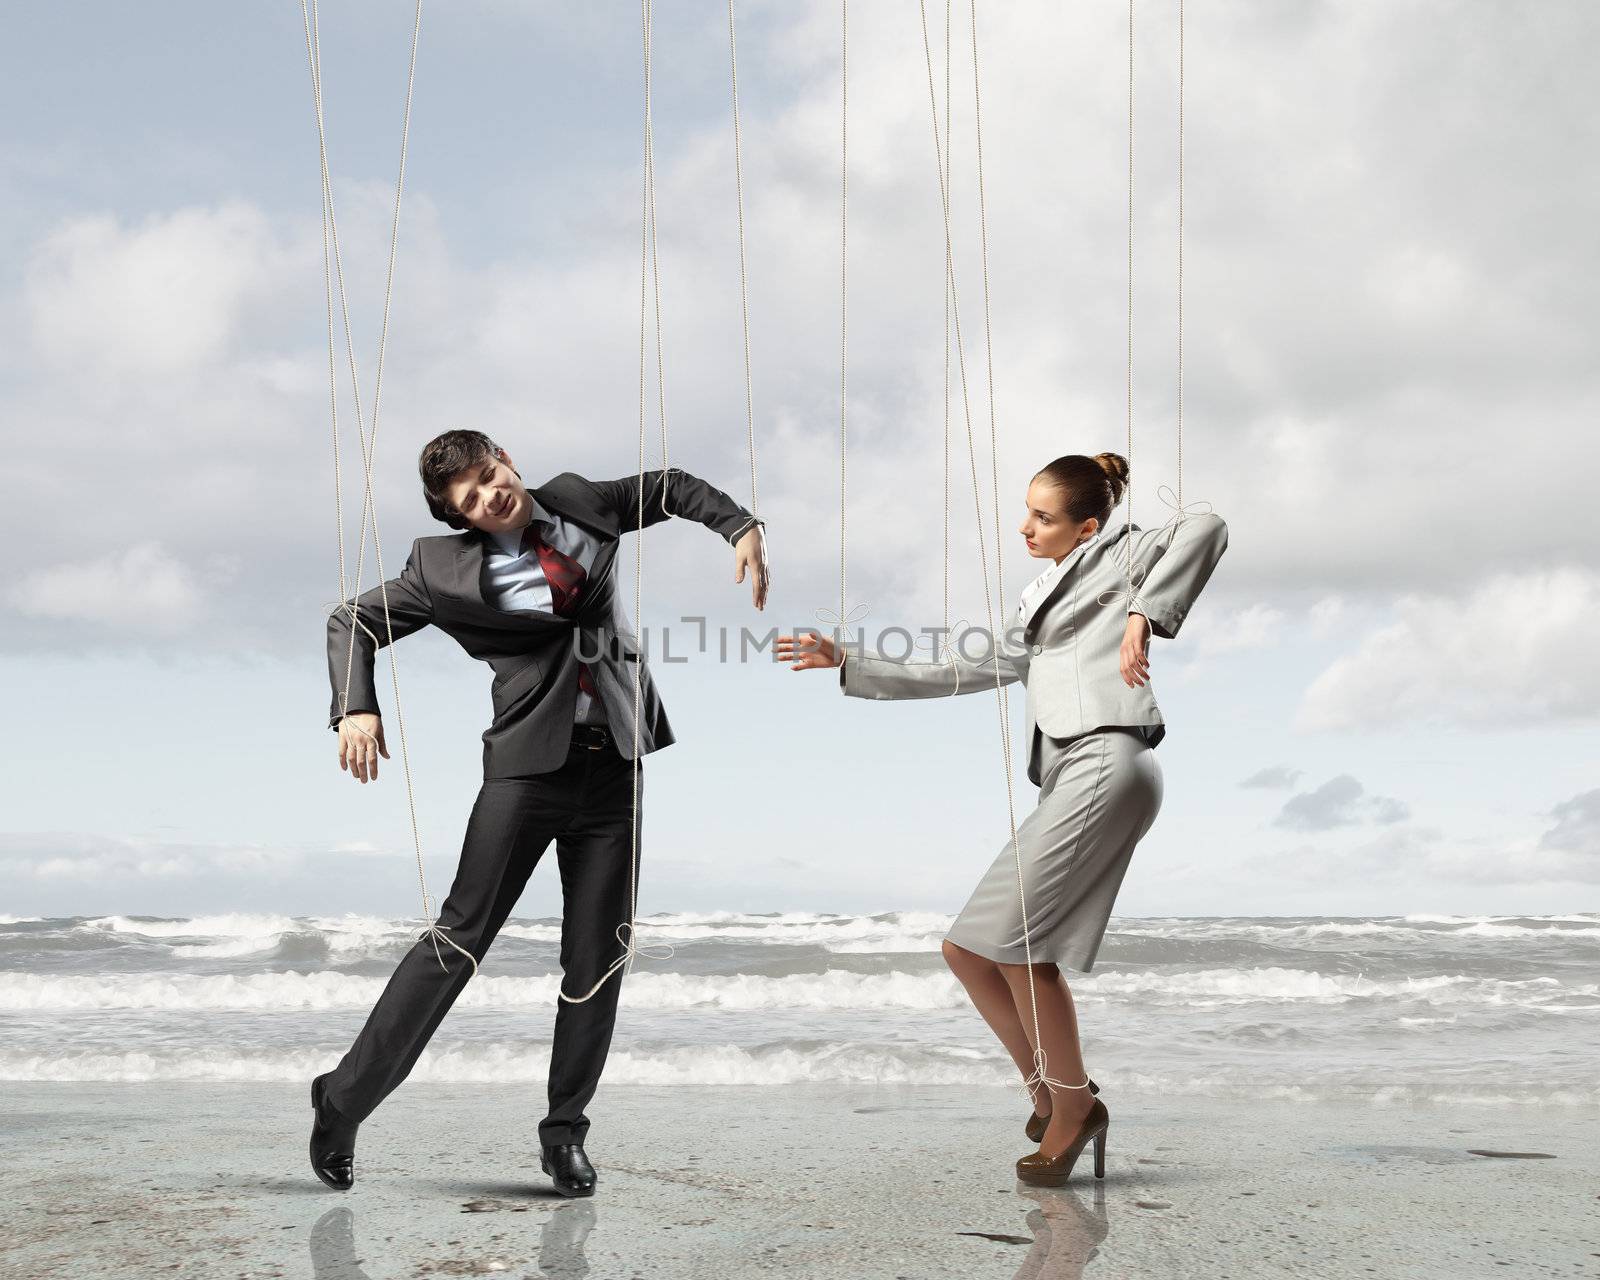 Image of businesspeople hanging on strings like marionettes against sea background. Conceptual photography